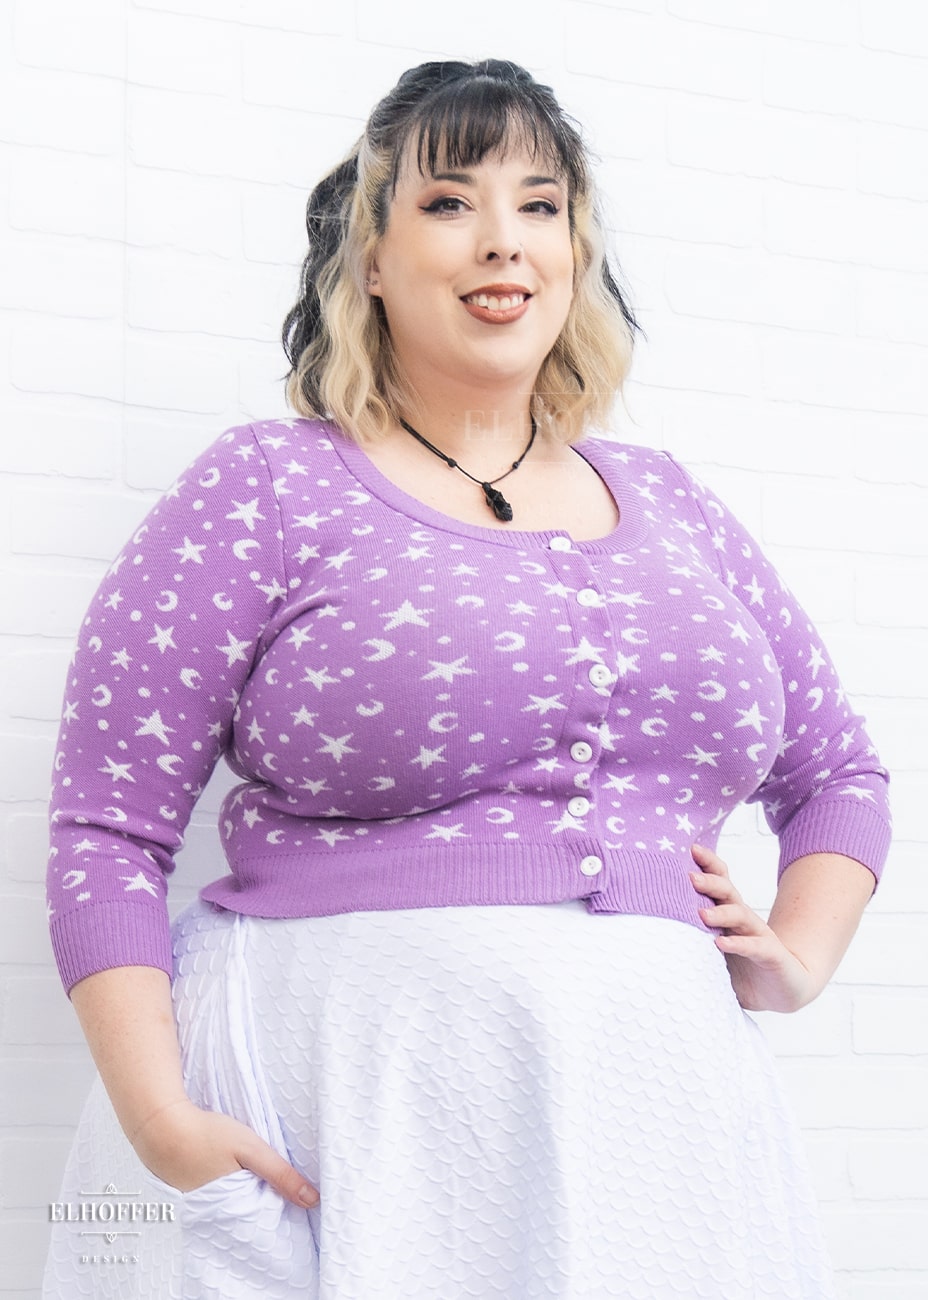 Essential Cordelia Cropped Cardi - Enchanted Violet Starry Witch